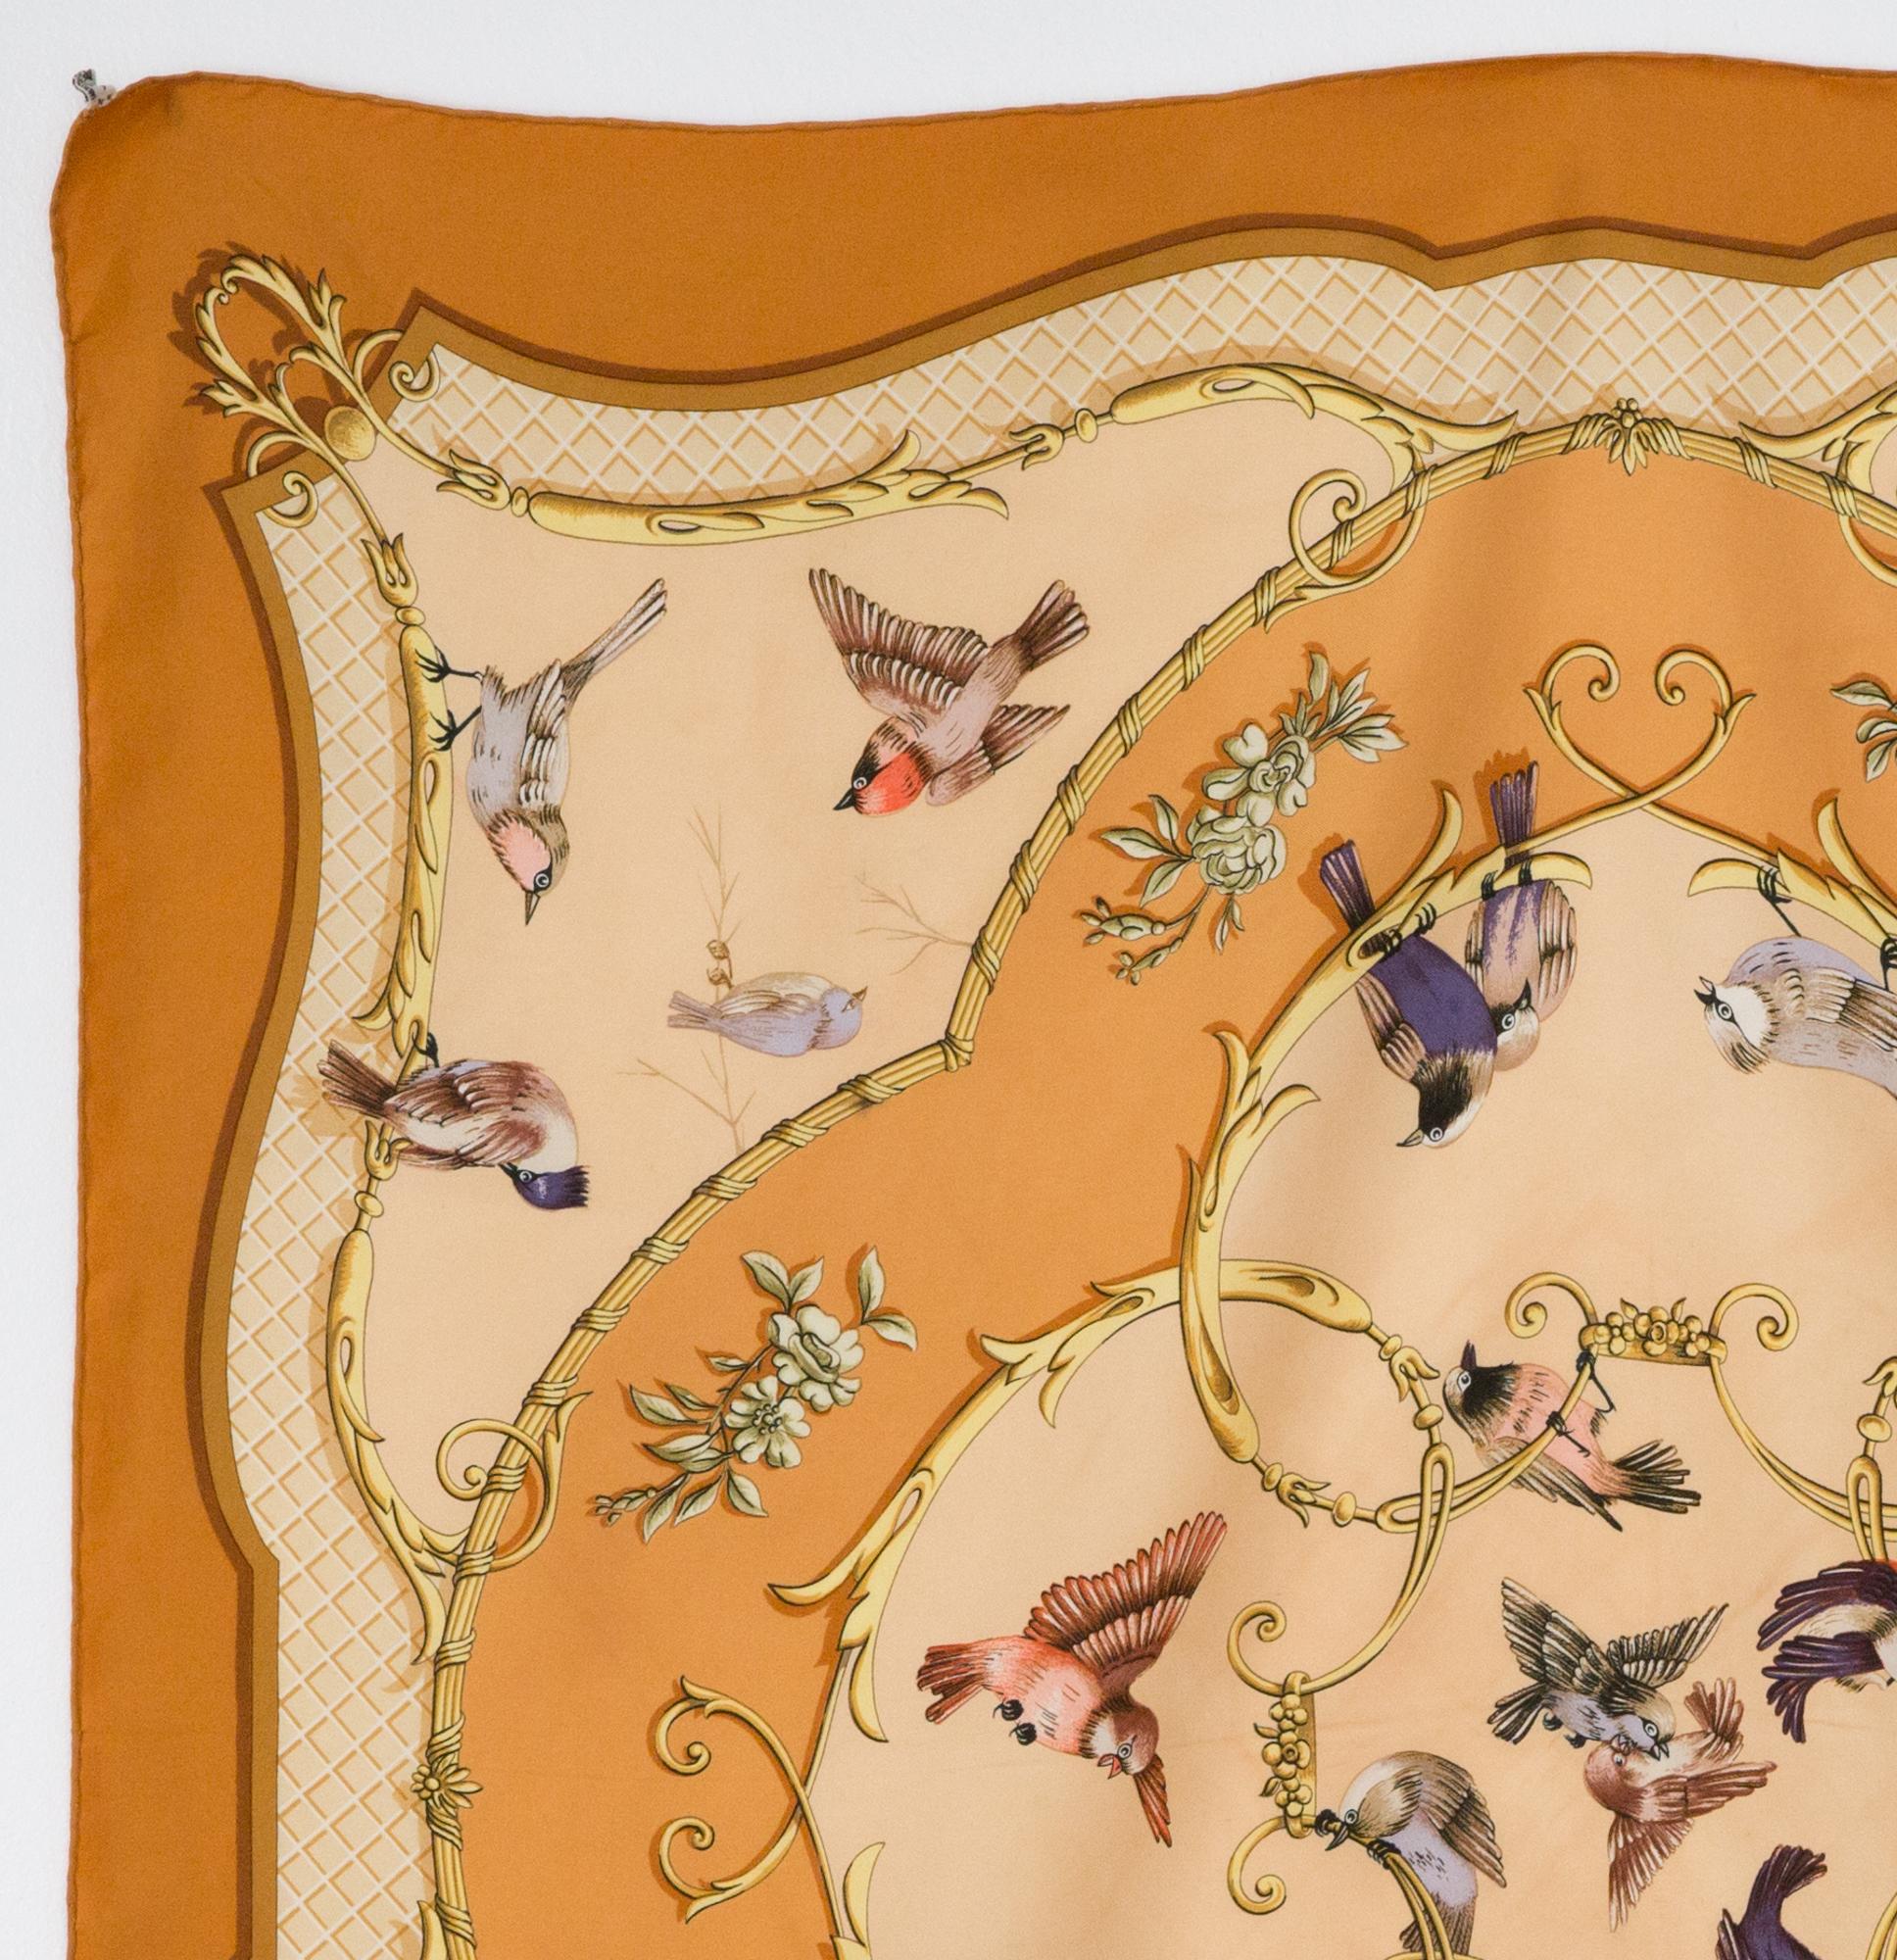 Hermes silk scarf  La Clé Des Champs by F. Faconnet featuring  a birds scene, a light orange border. 
First edition 1965- Reedition 1995
In good vintage condition. Made in France.
35,4in. (90cm)  X 35,4in. (90cm)
We guarantee you will receive this 